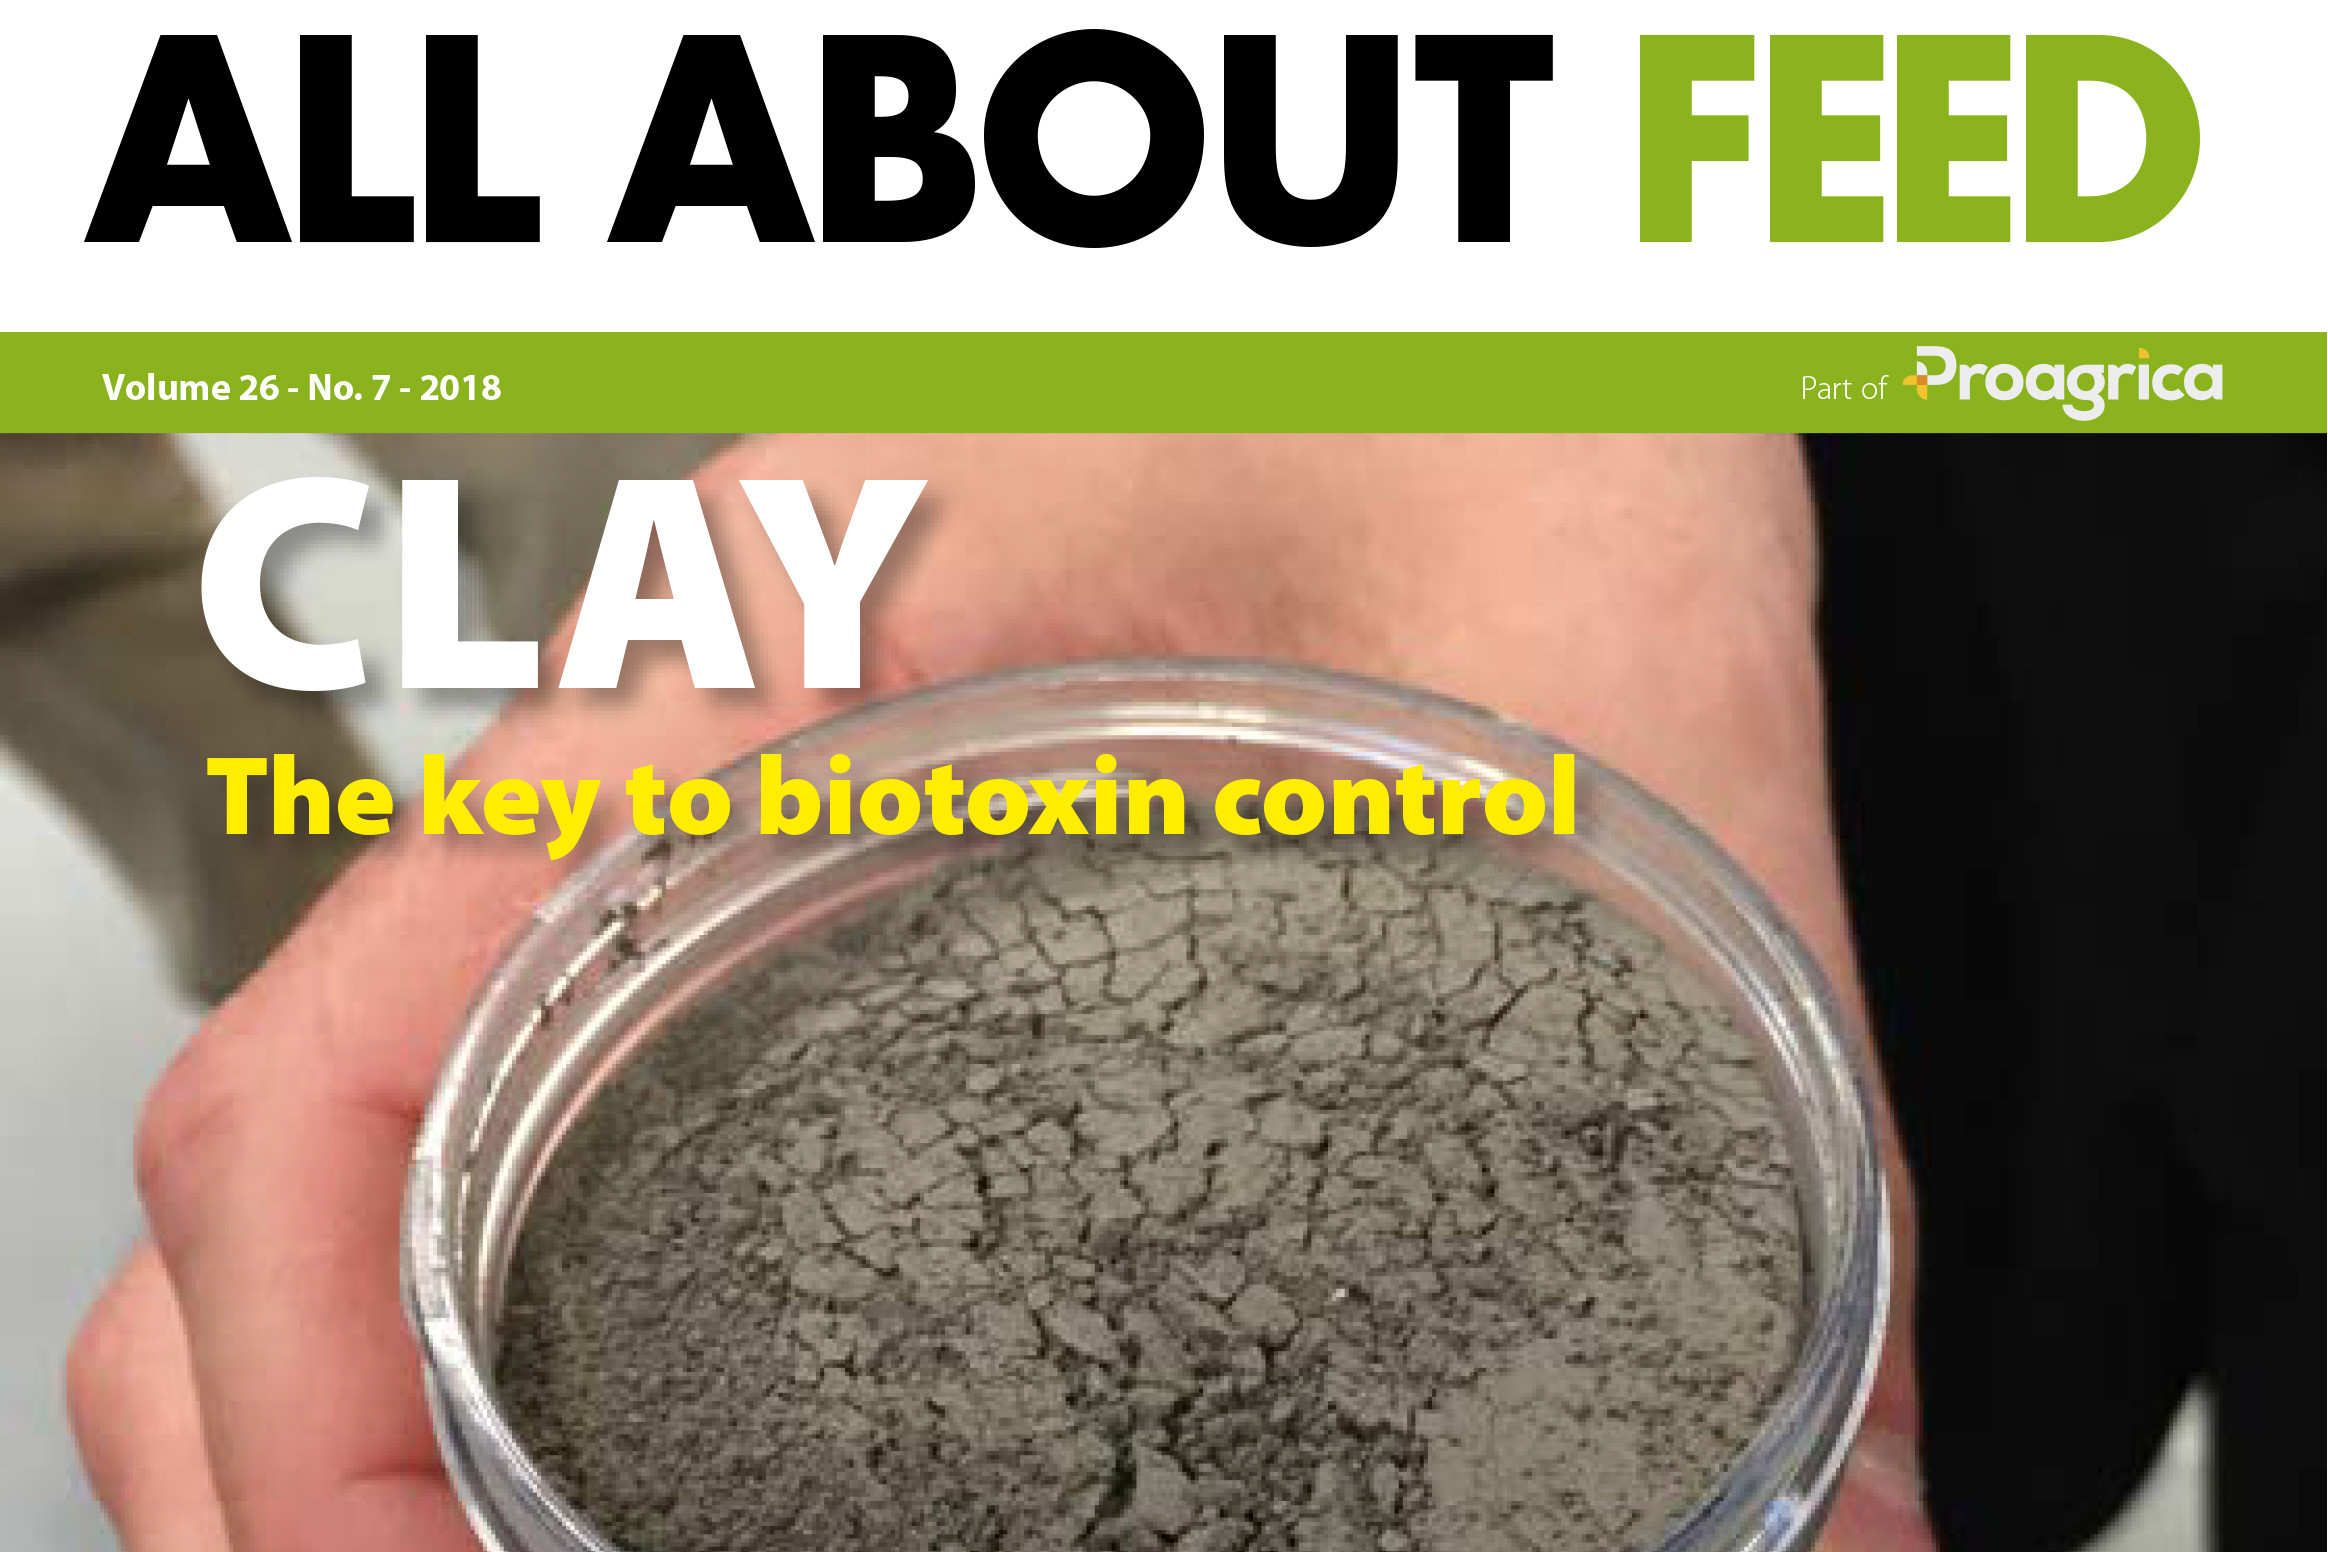 Issue 7 of All About Feed now available online